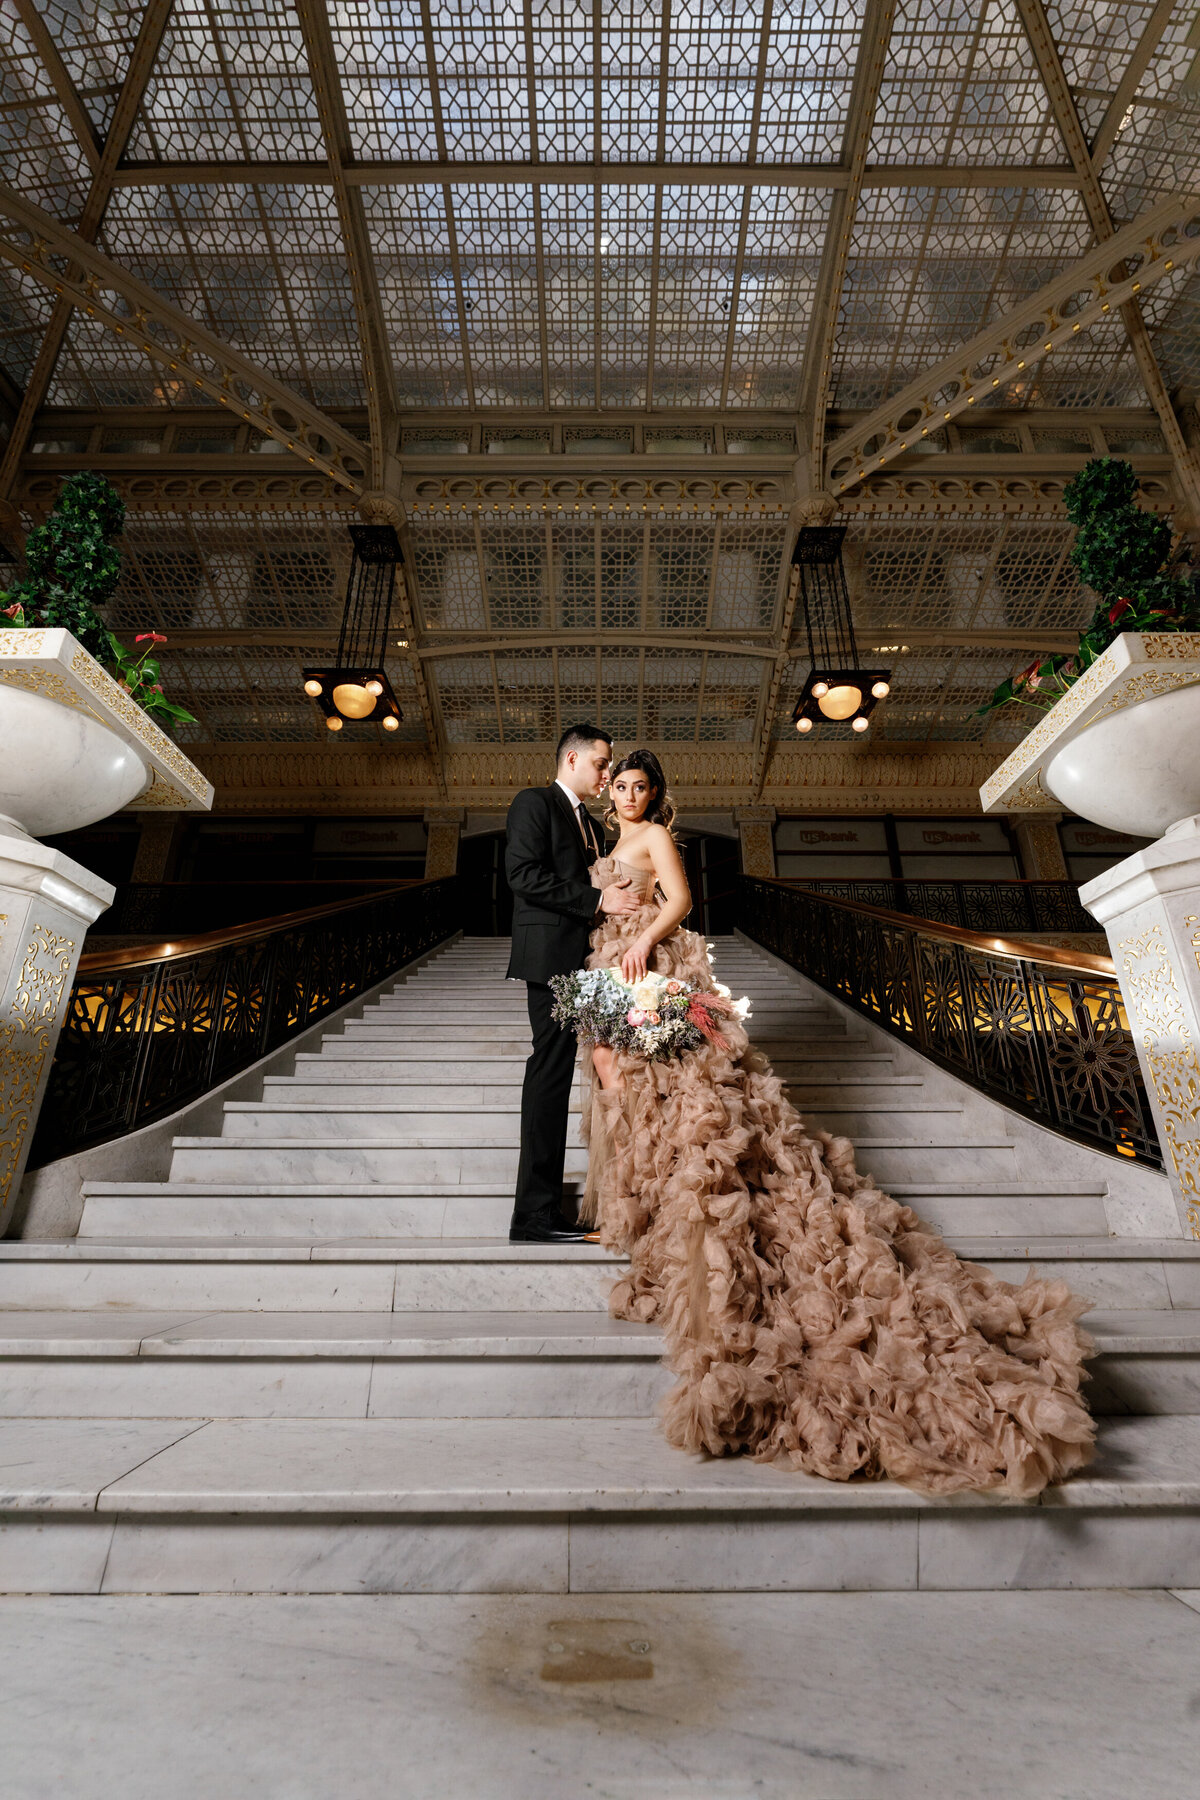 Aspen-Avenue-Chicago-Wedding-Photographer-Rookery-Engagement-Session-Histoircal-Stairs-Moody-Dramatic-Magazine-Unique-Gown-Stemming-From-Love-Emily-Rae-Bridal-Hair-FAV-45